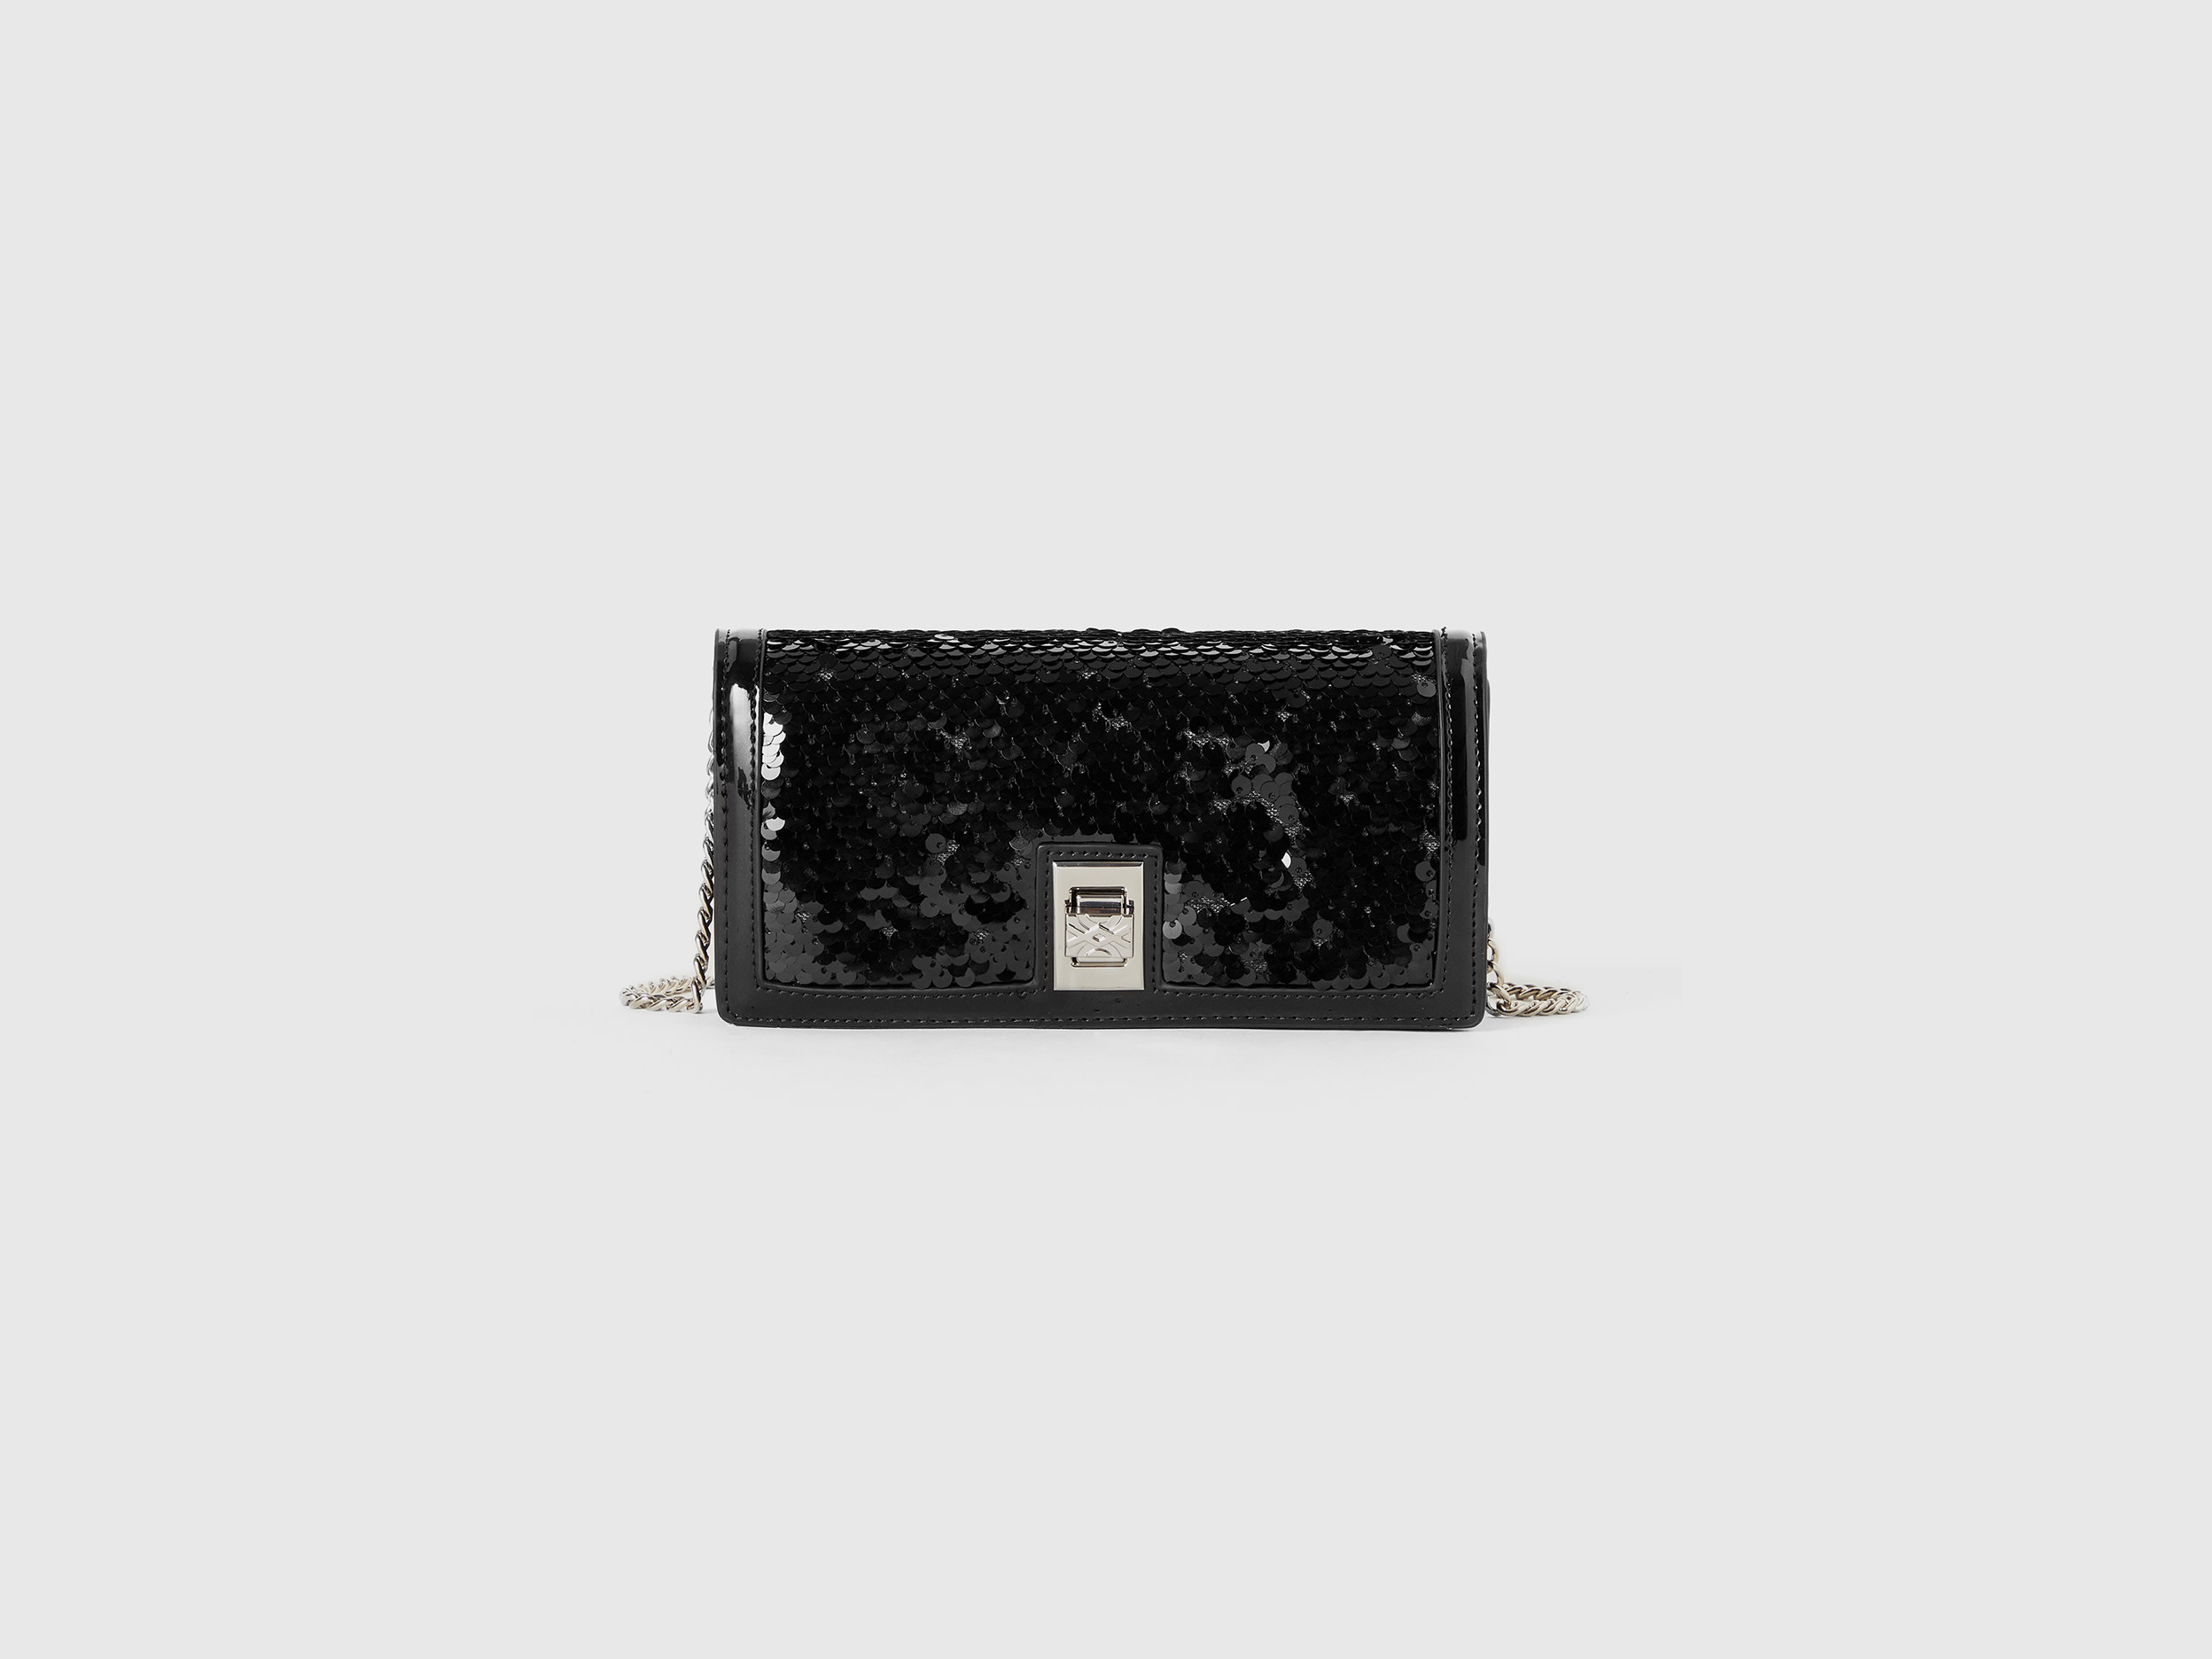 Benetton, Envelope Clutch With Sequins, size OS, Black, Women